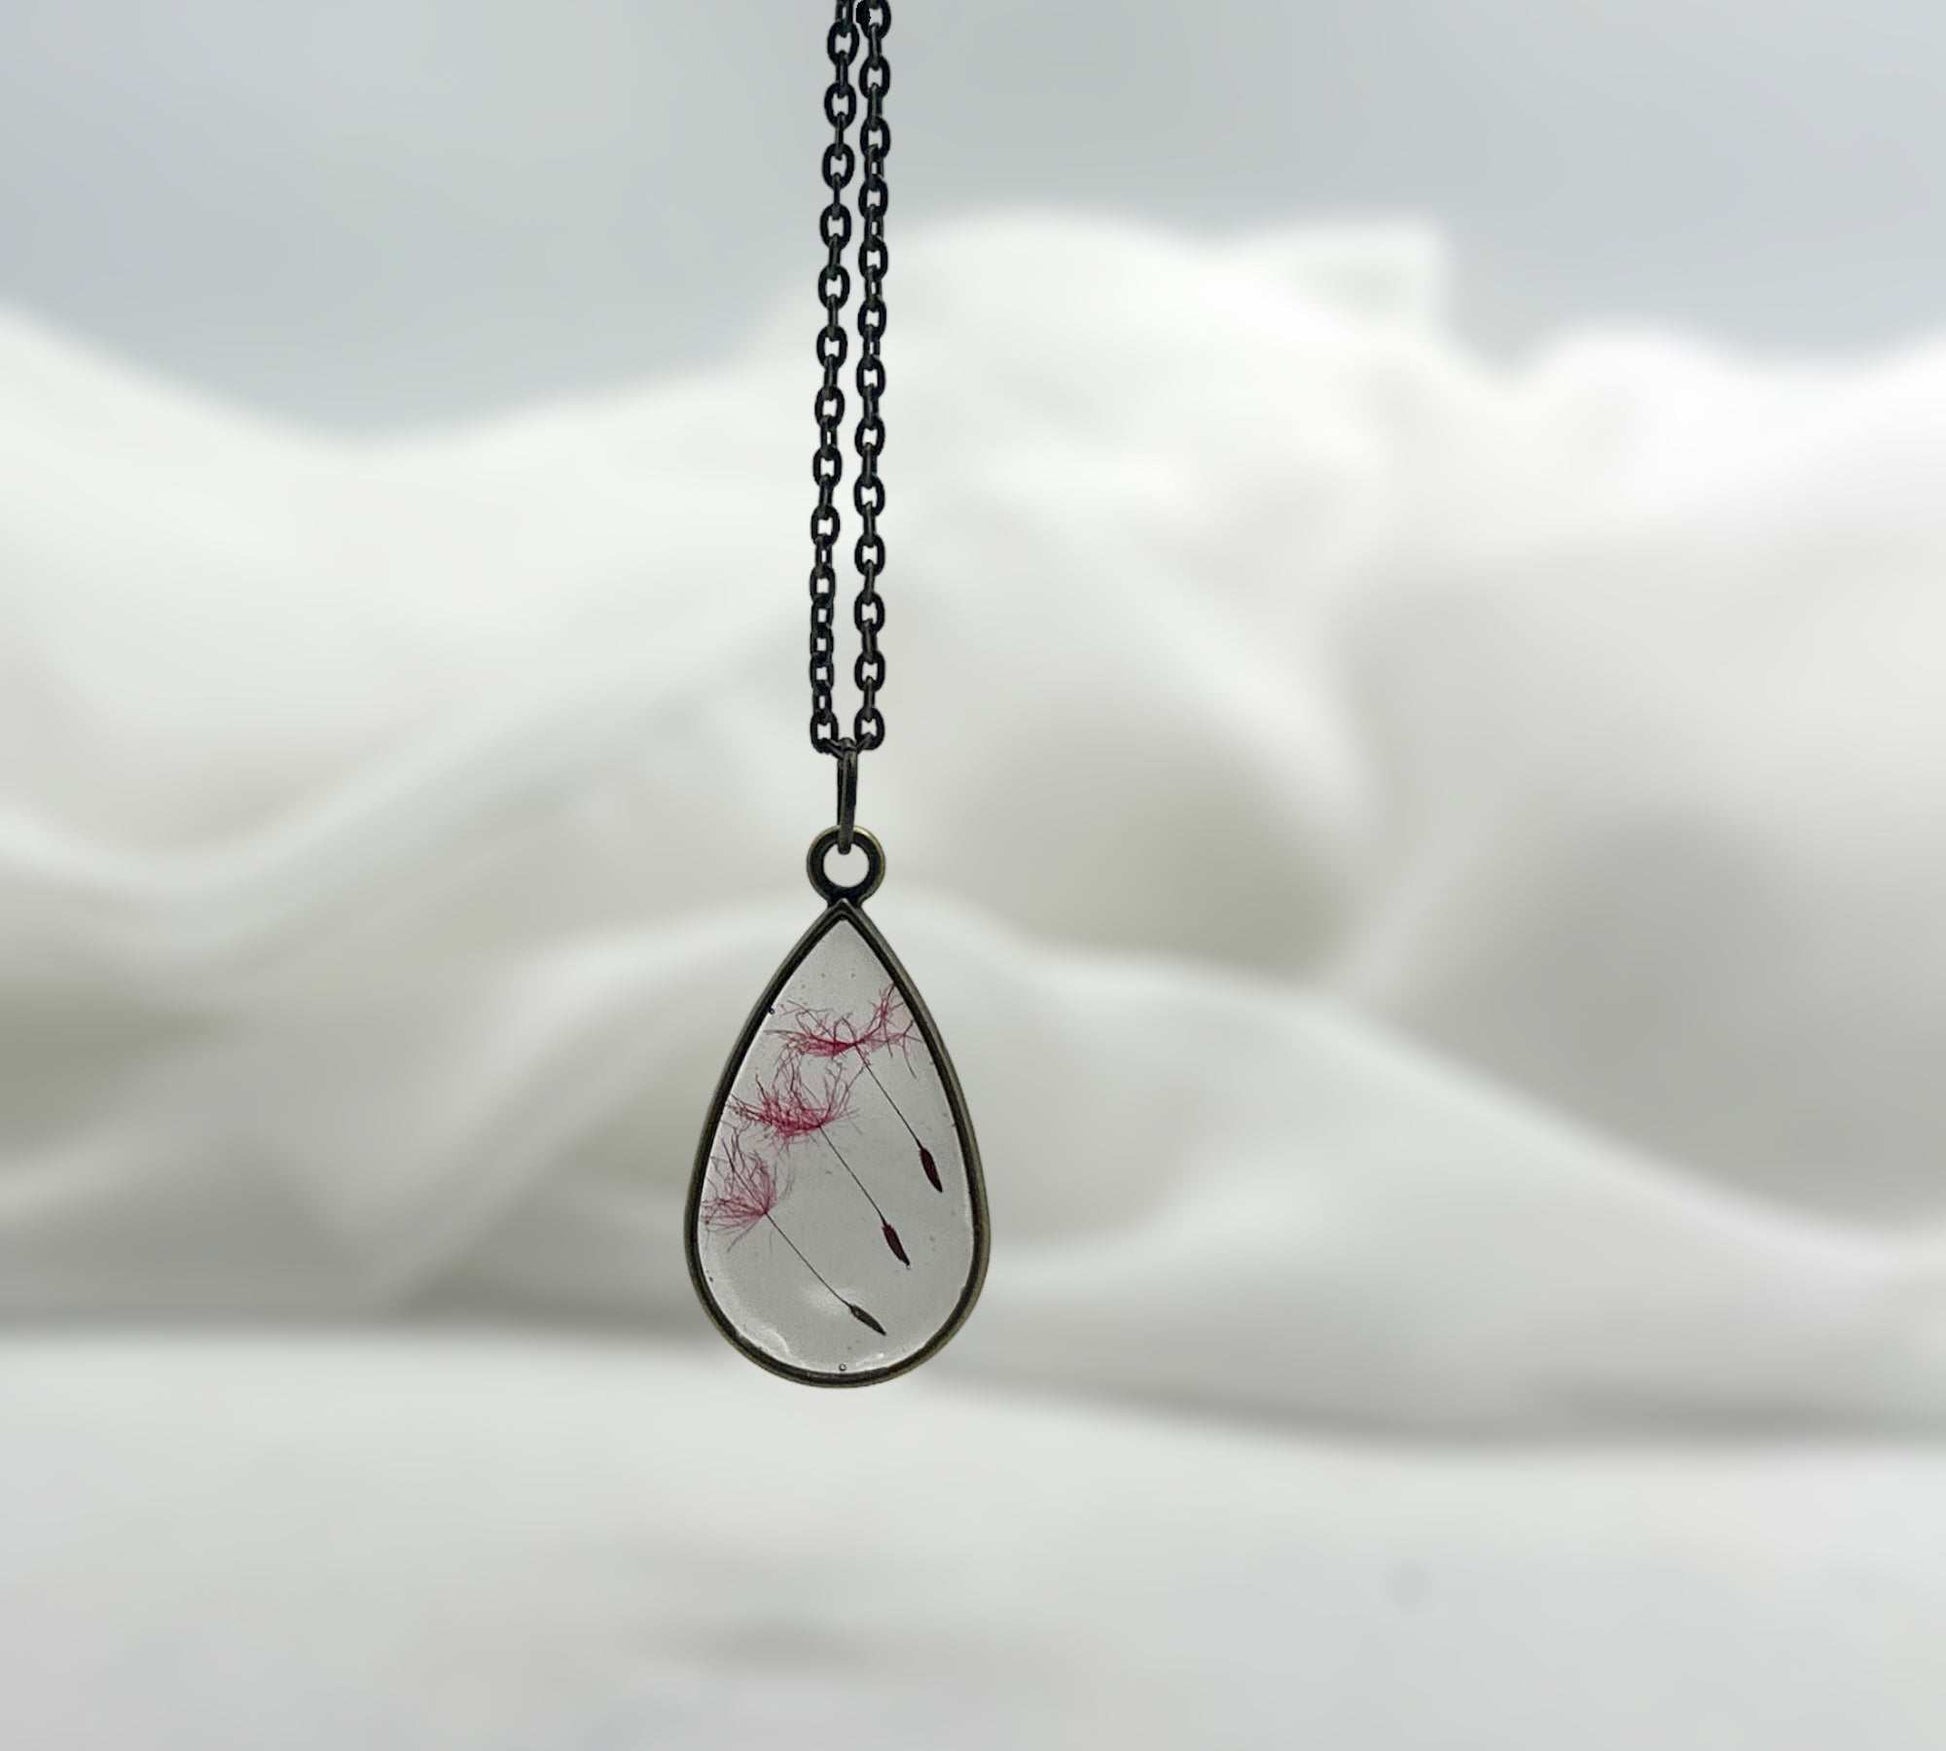 Fairy Wishes: Dandelion Dreams Whimsical Pendant Collection